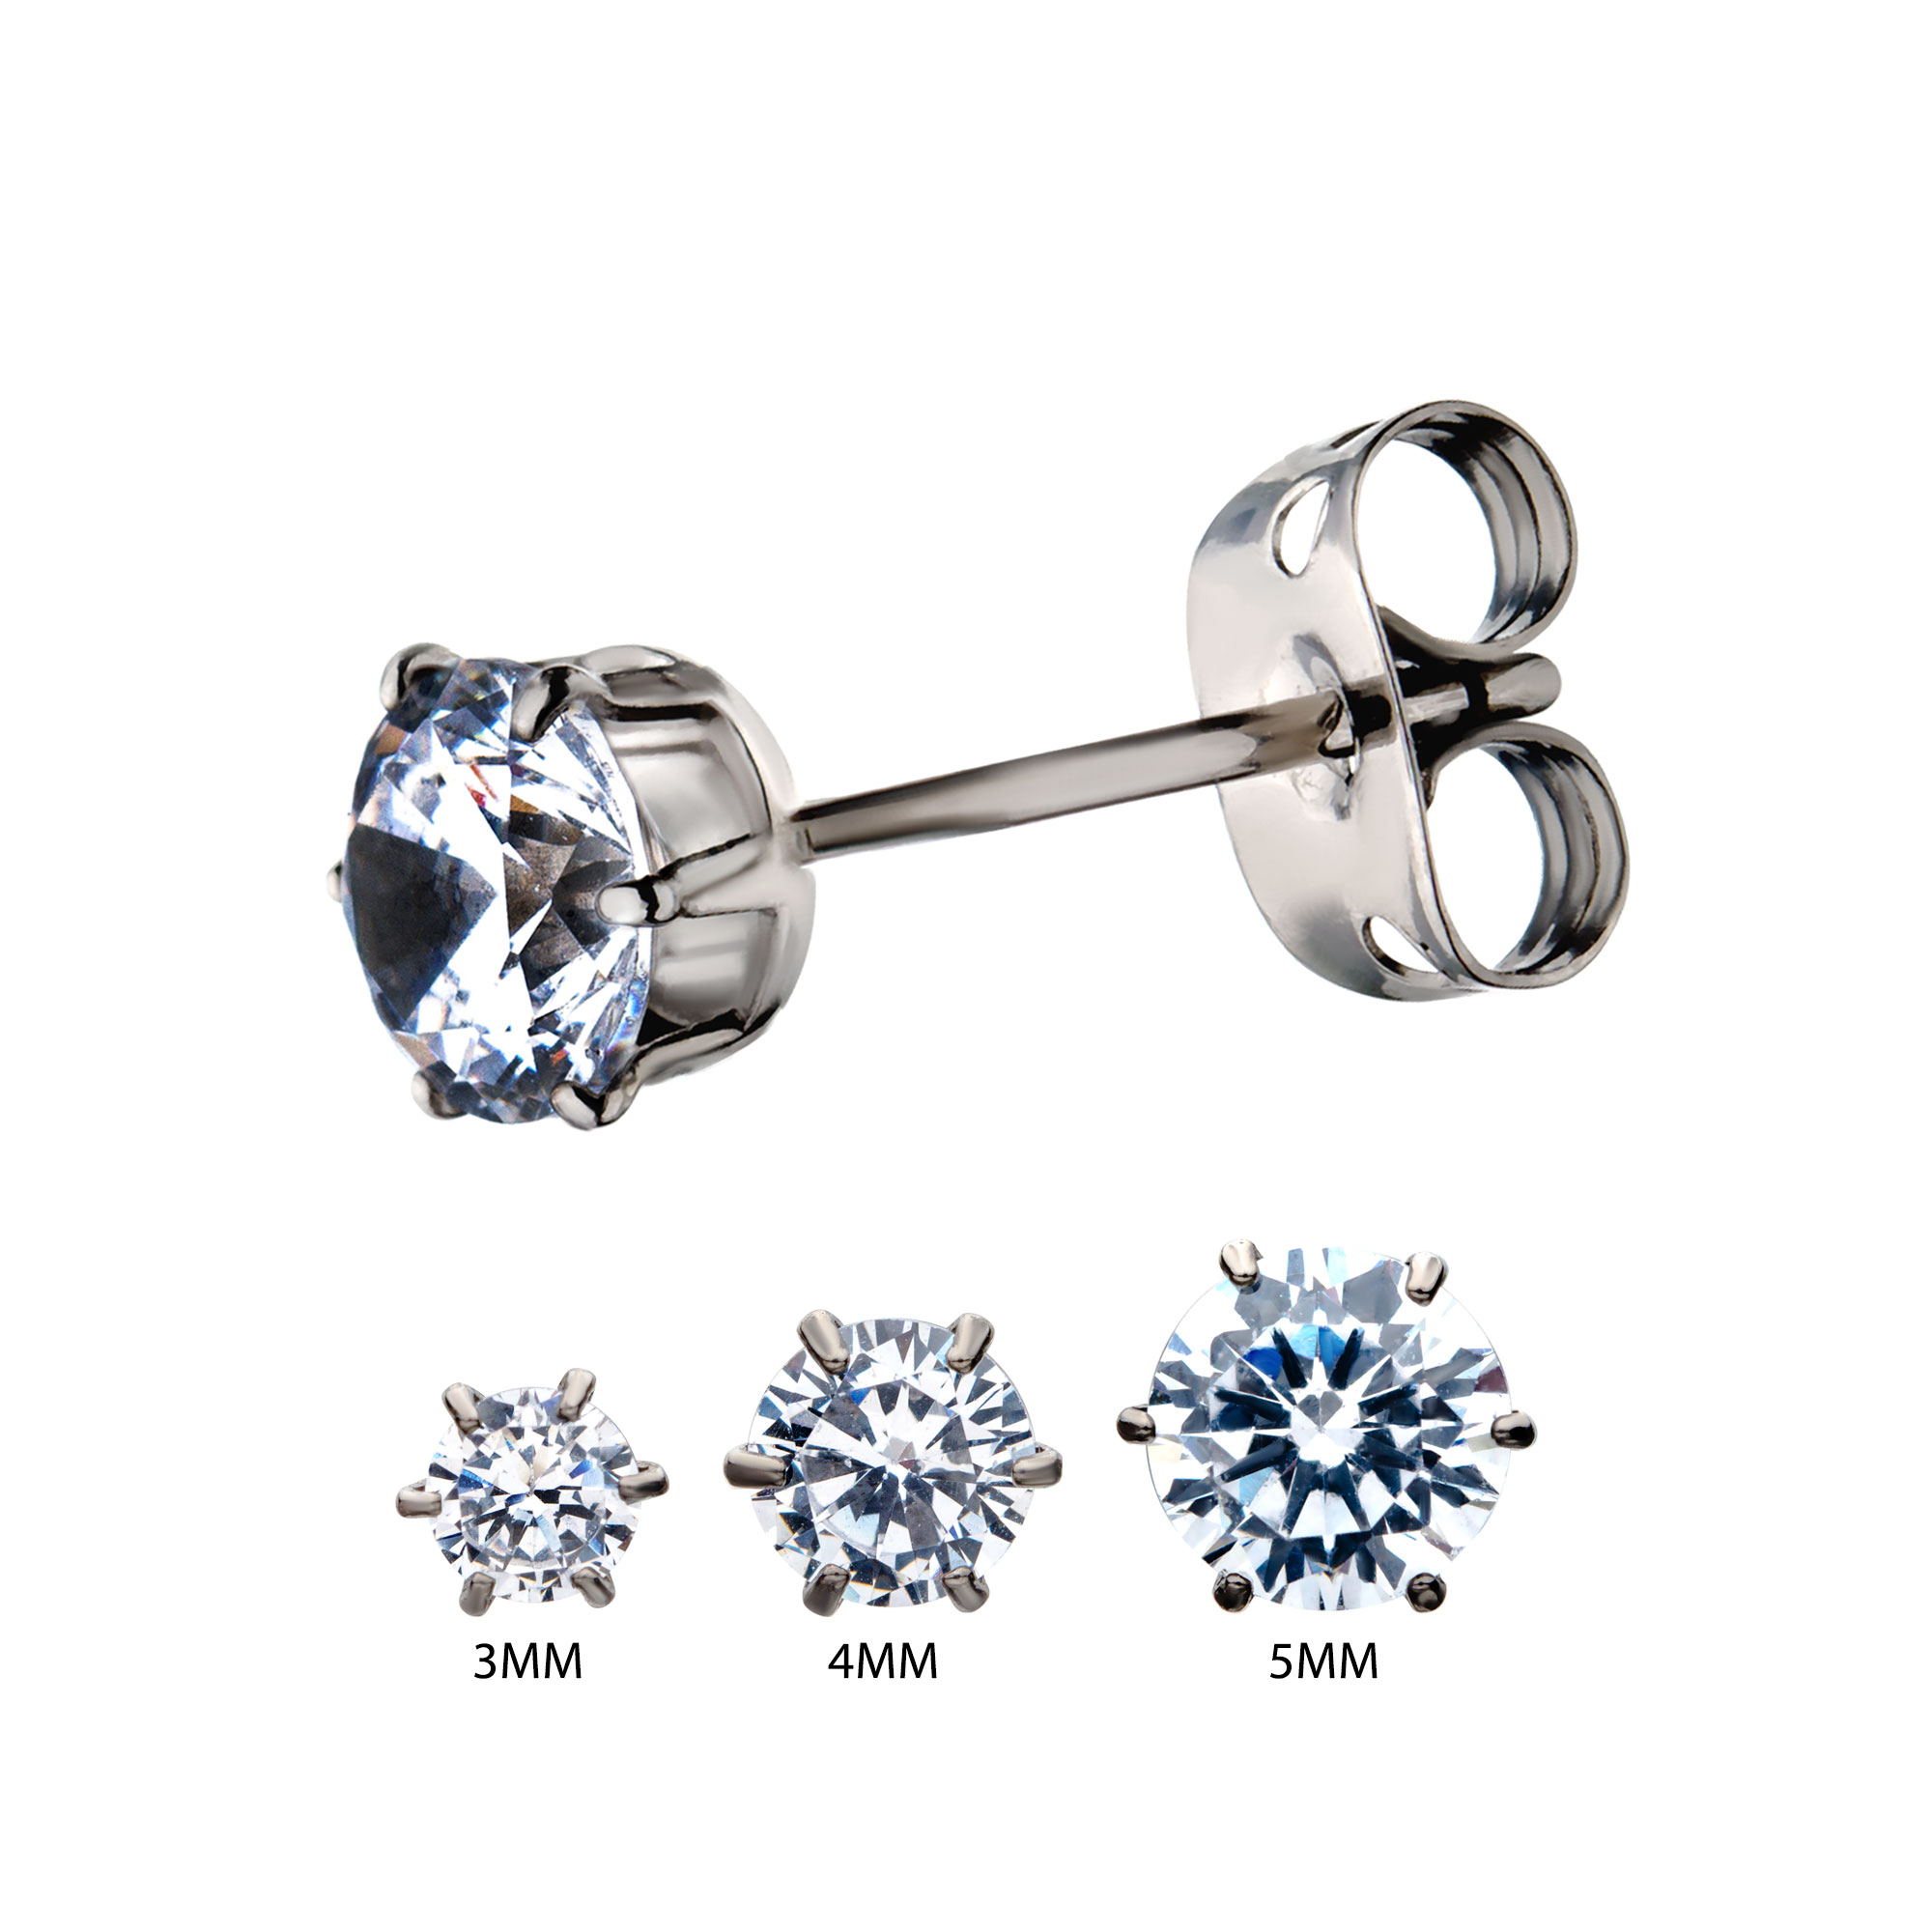 20g Titanium Post and Butterfly Back with Prong Set CZ Stud Earrings Ken Walker Jewelers Gig Harbor, WA